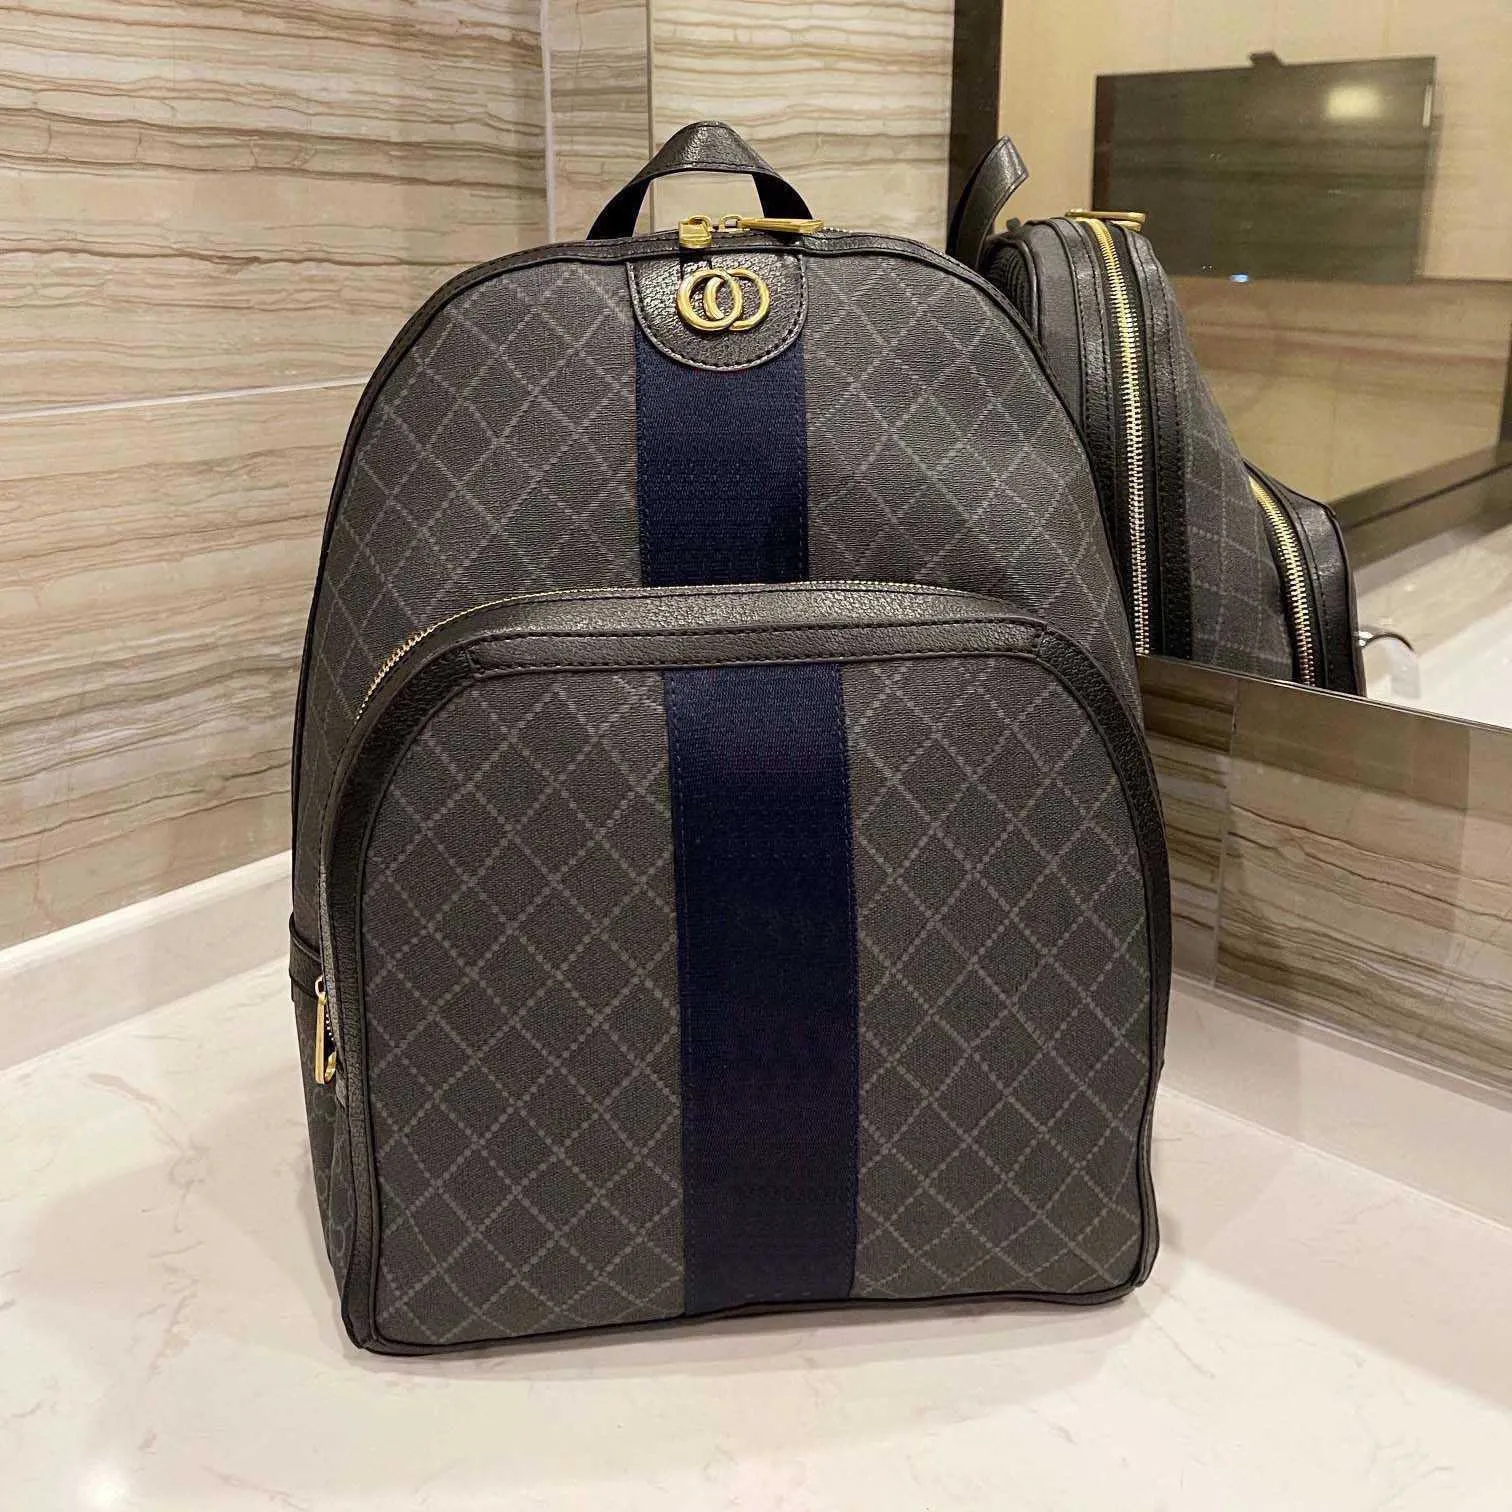 Designer backpack Luxury Brand Purse Double shoulder straps backpacks Women Wallet Real Leather Bags Lady Plaid Purses Duffle Luggage by fenhongbag 01